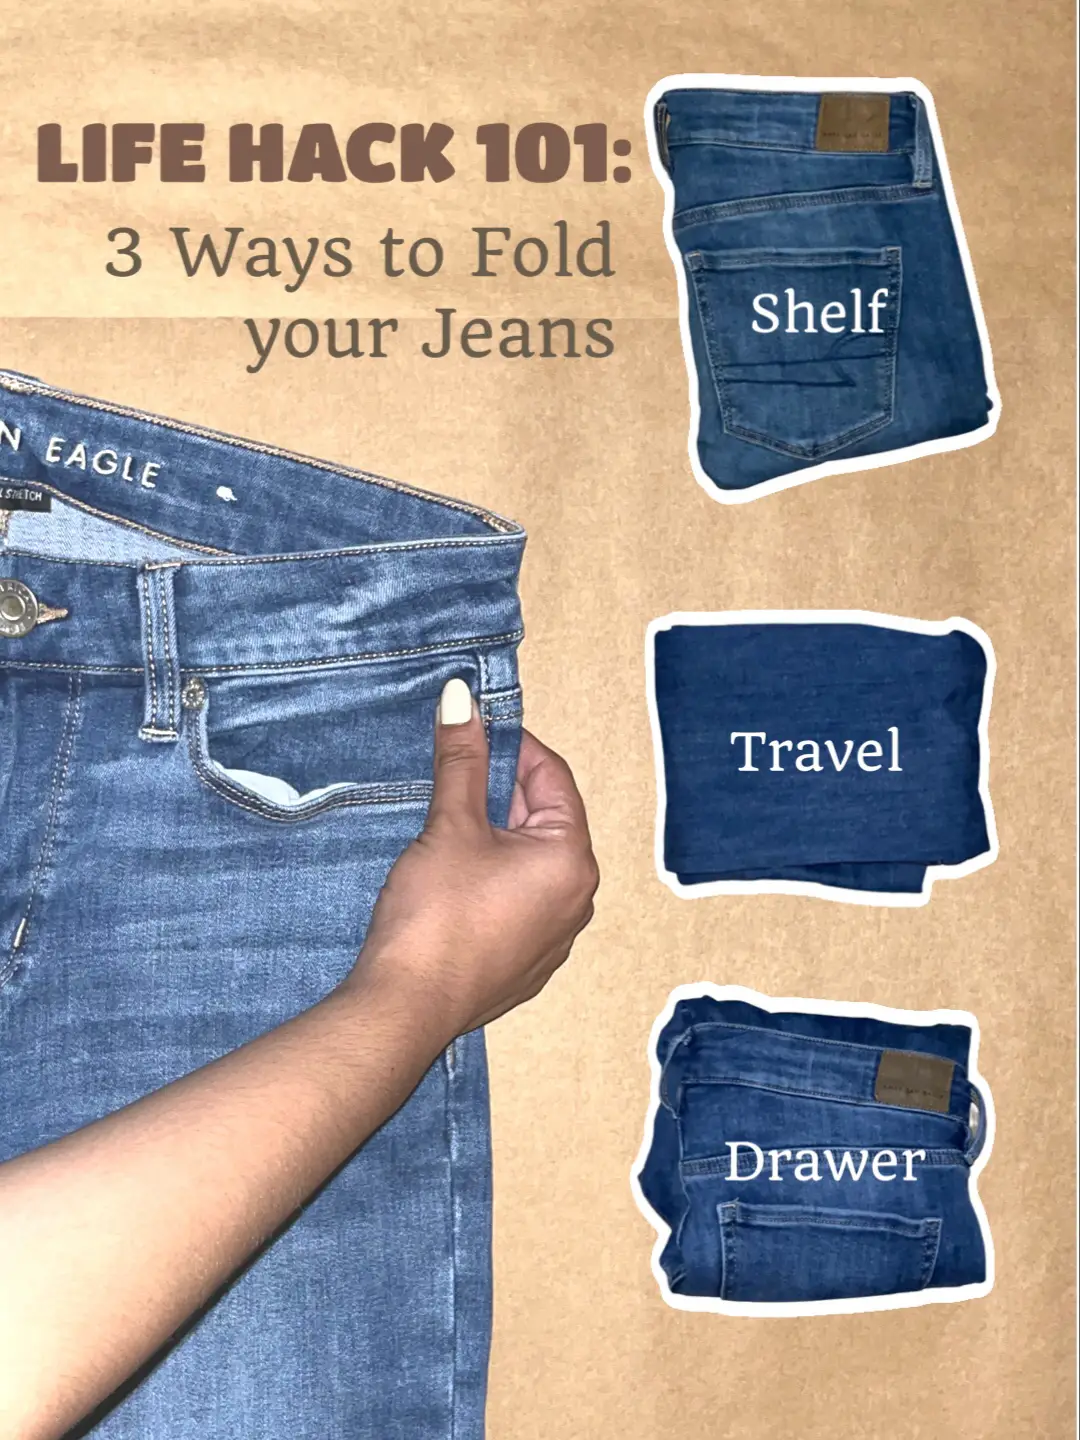 How to hem your pants without sewing #lifehack #diyproject #howto